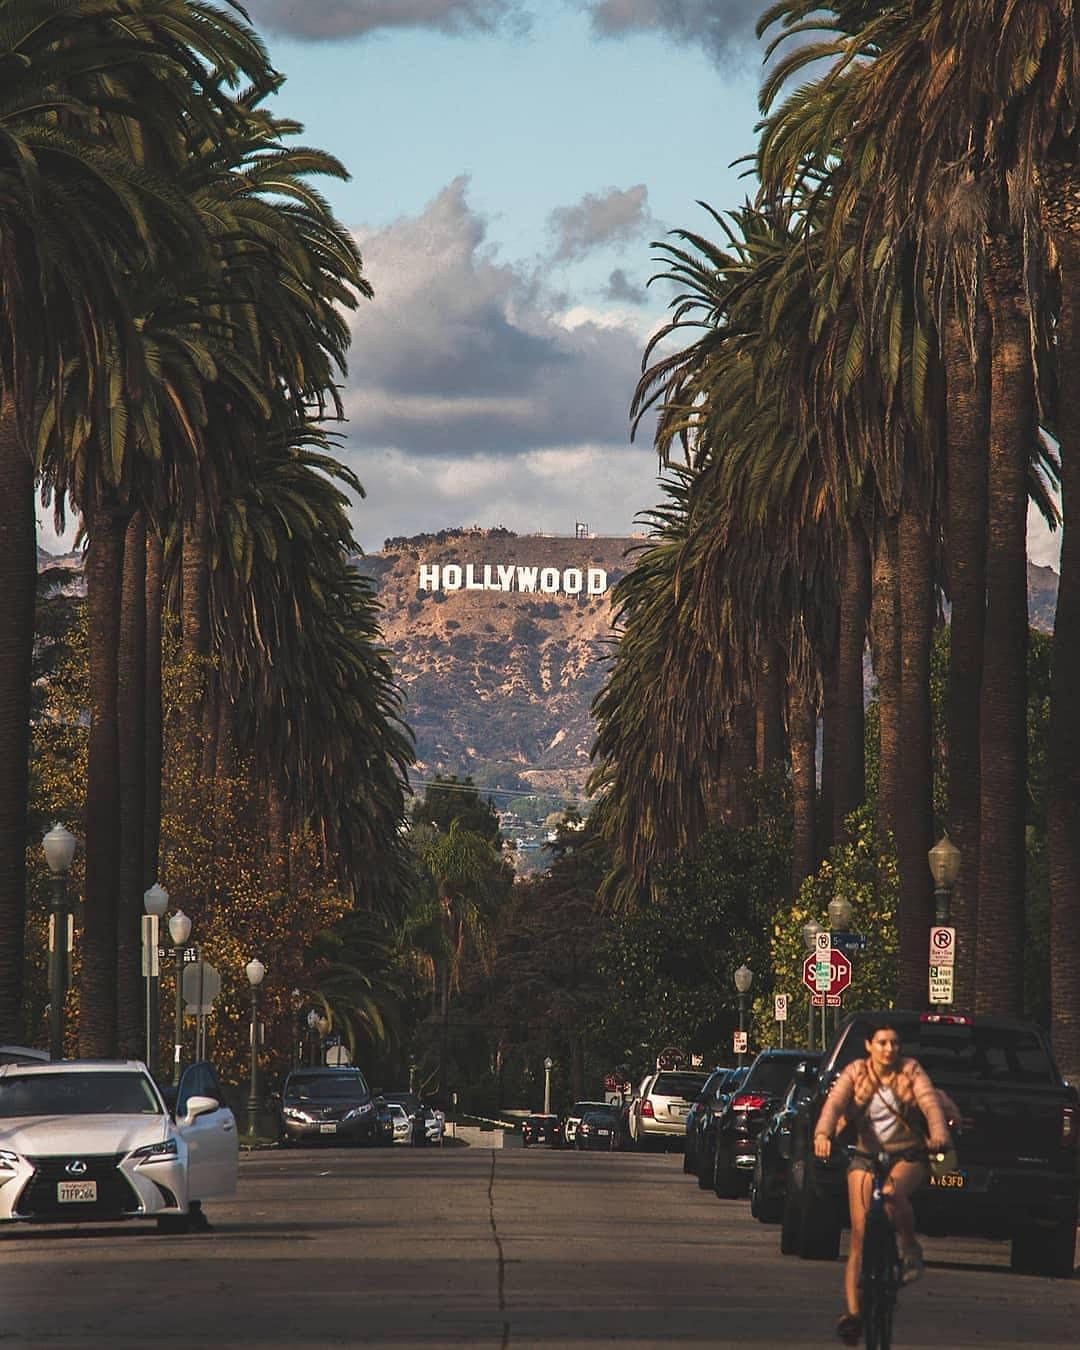 Hollywood Street Signage View Background